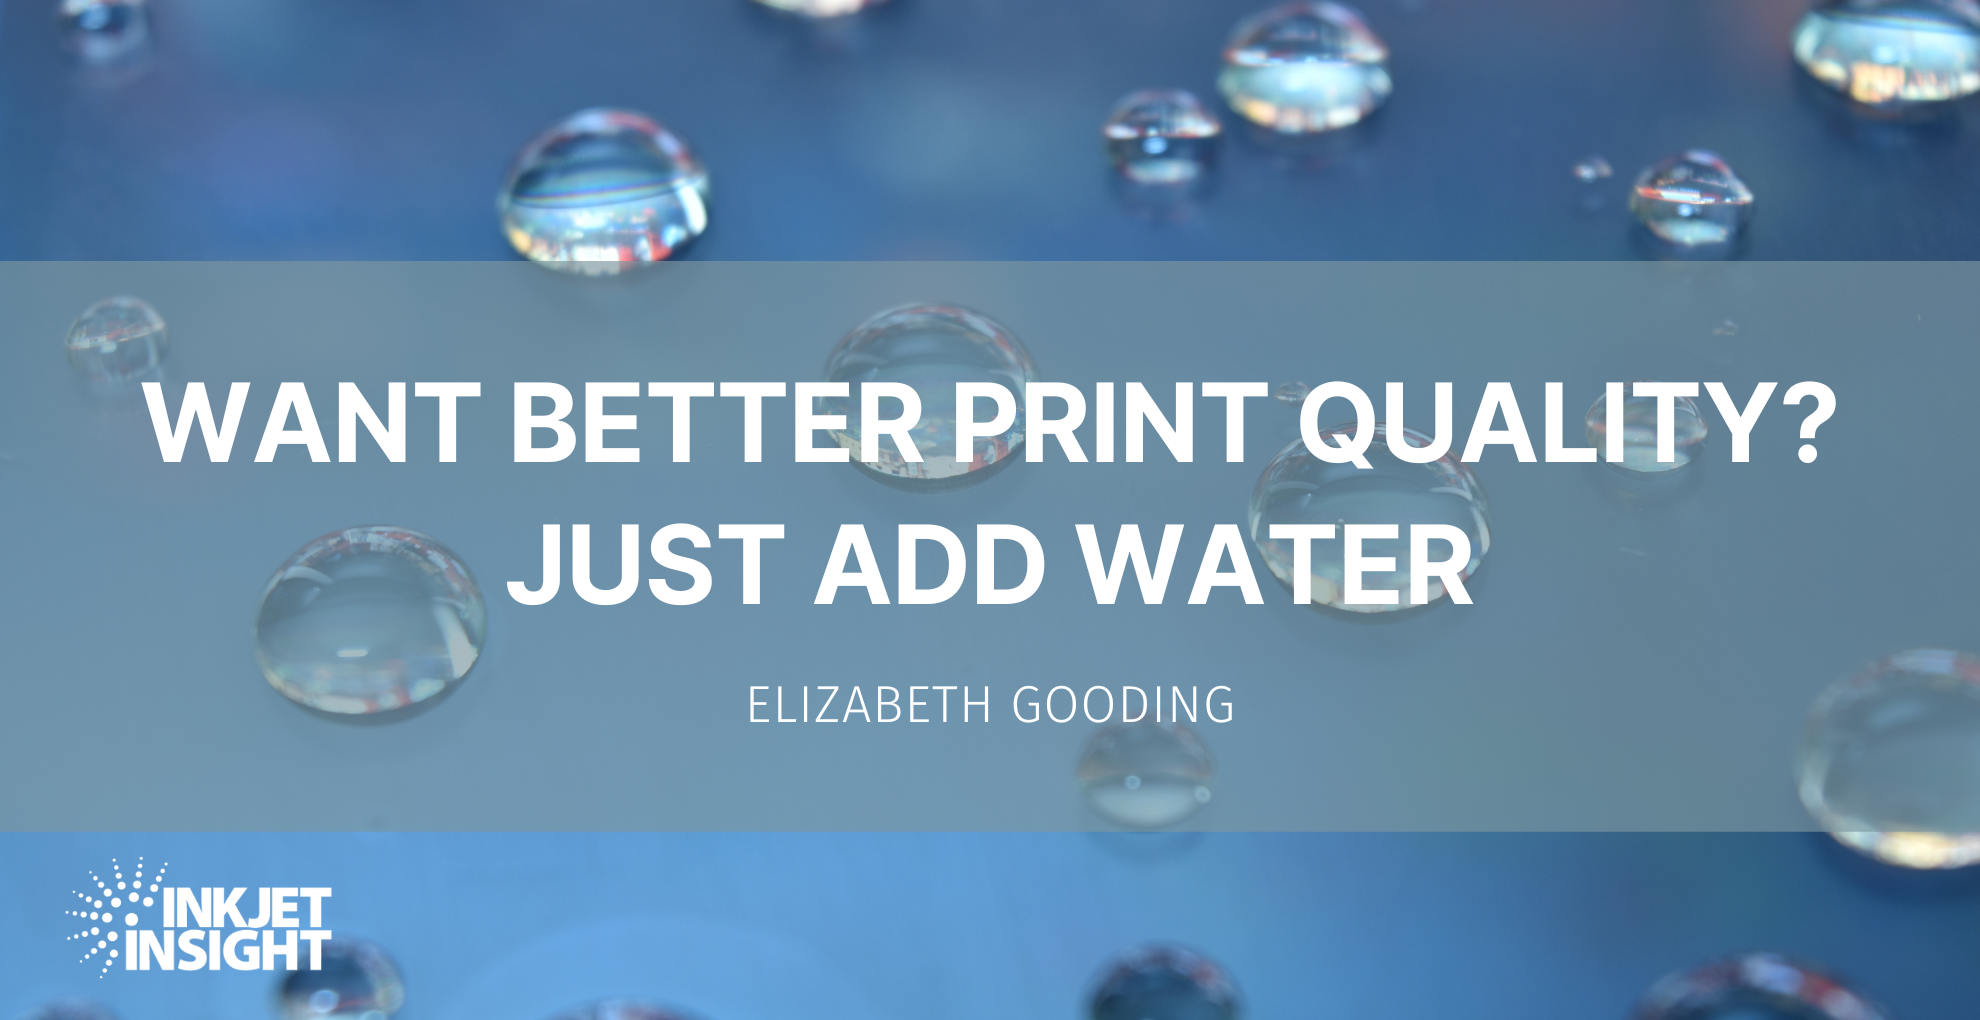 Featured image for “Want better print quality? Just add water”